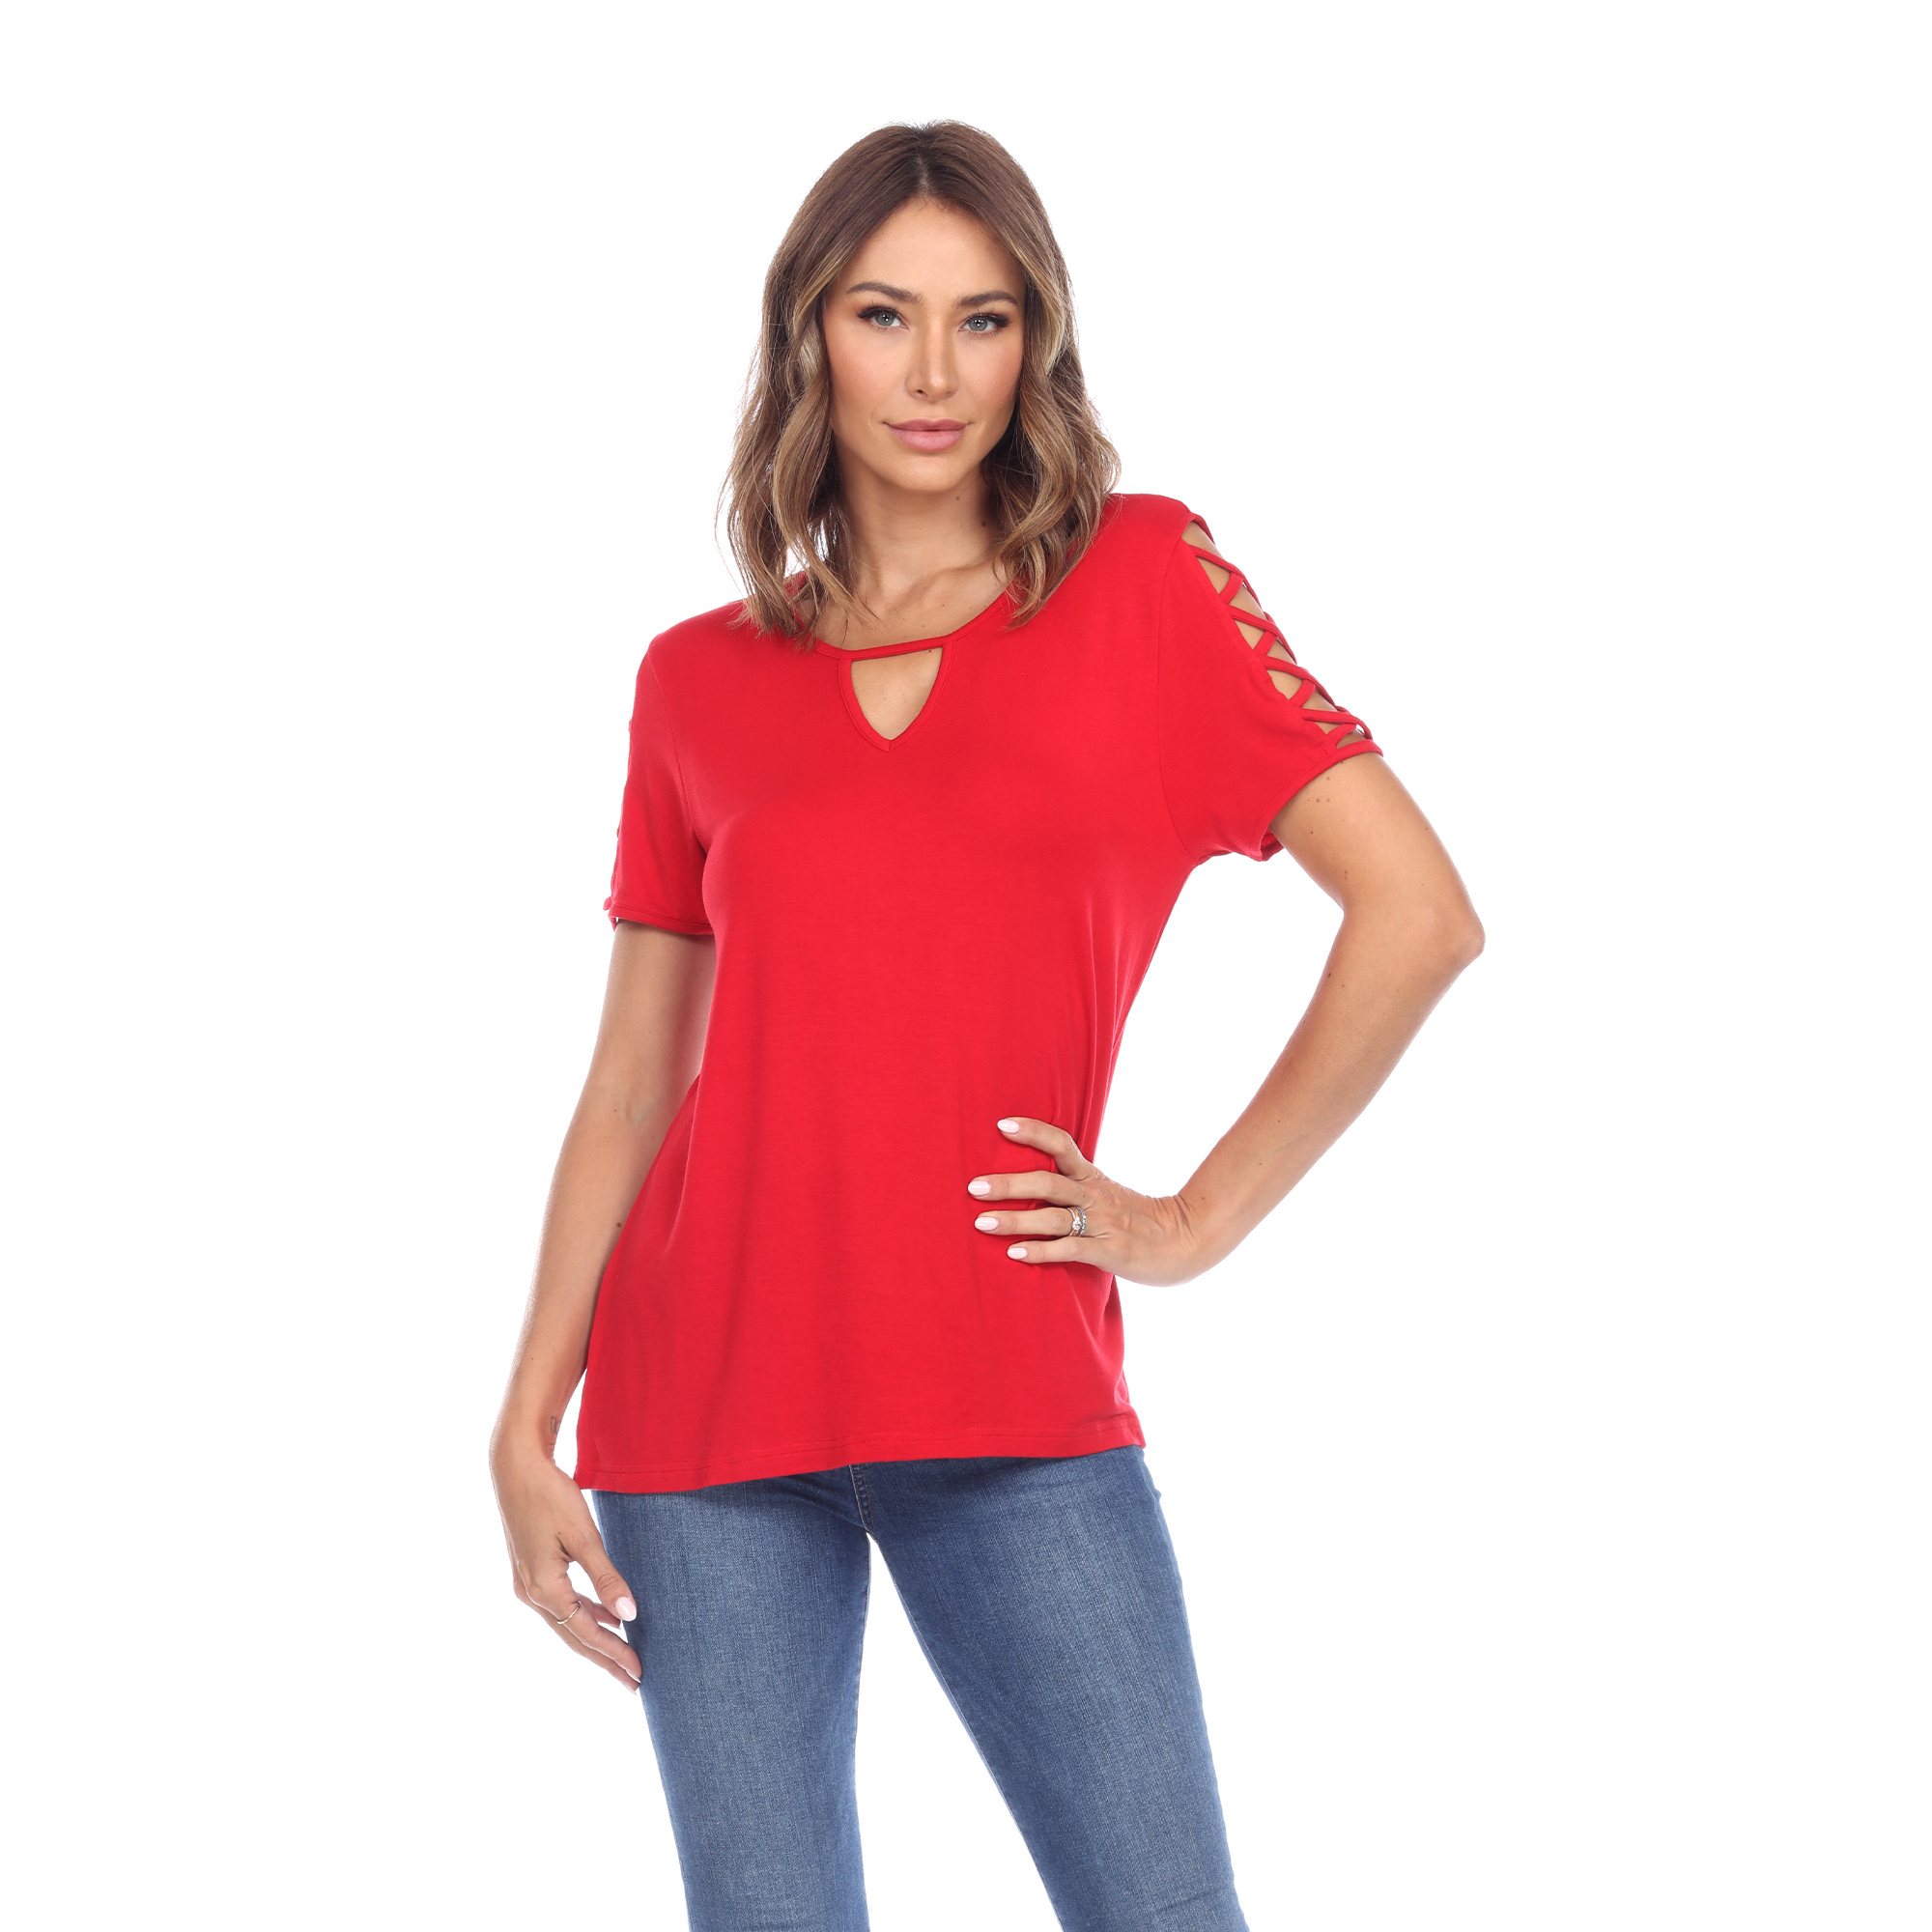 White Mark Women's Keyhole Neck Cutout Short Sleeve Top - Red, 3X